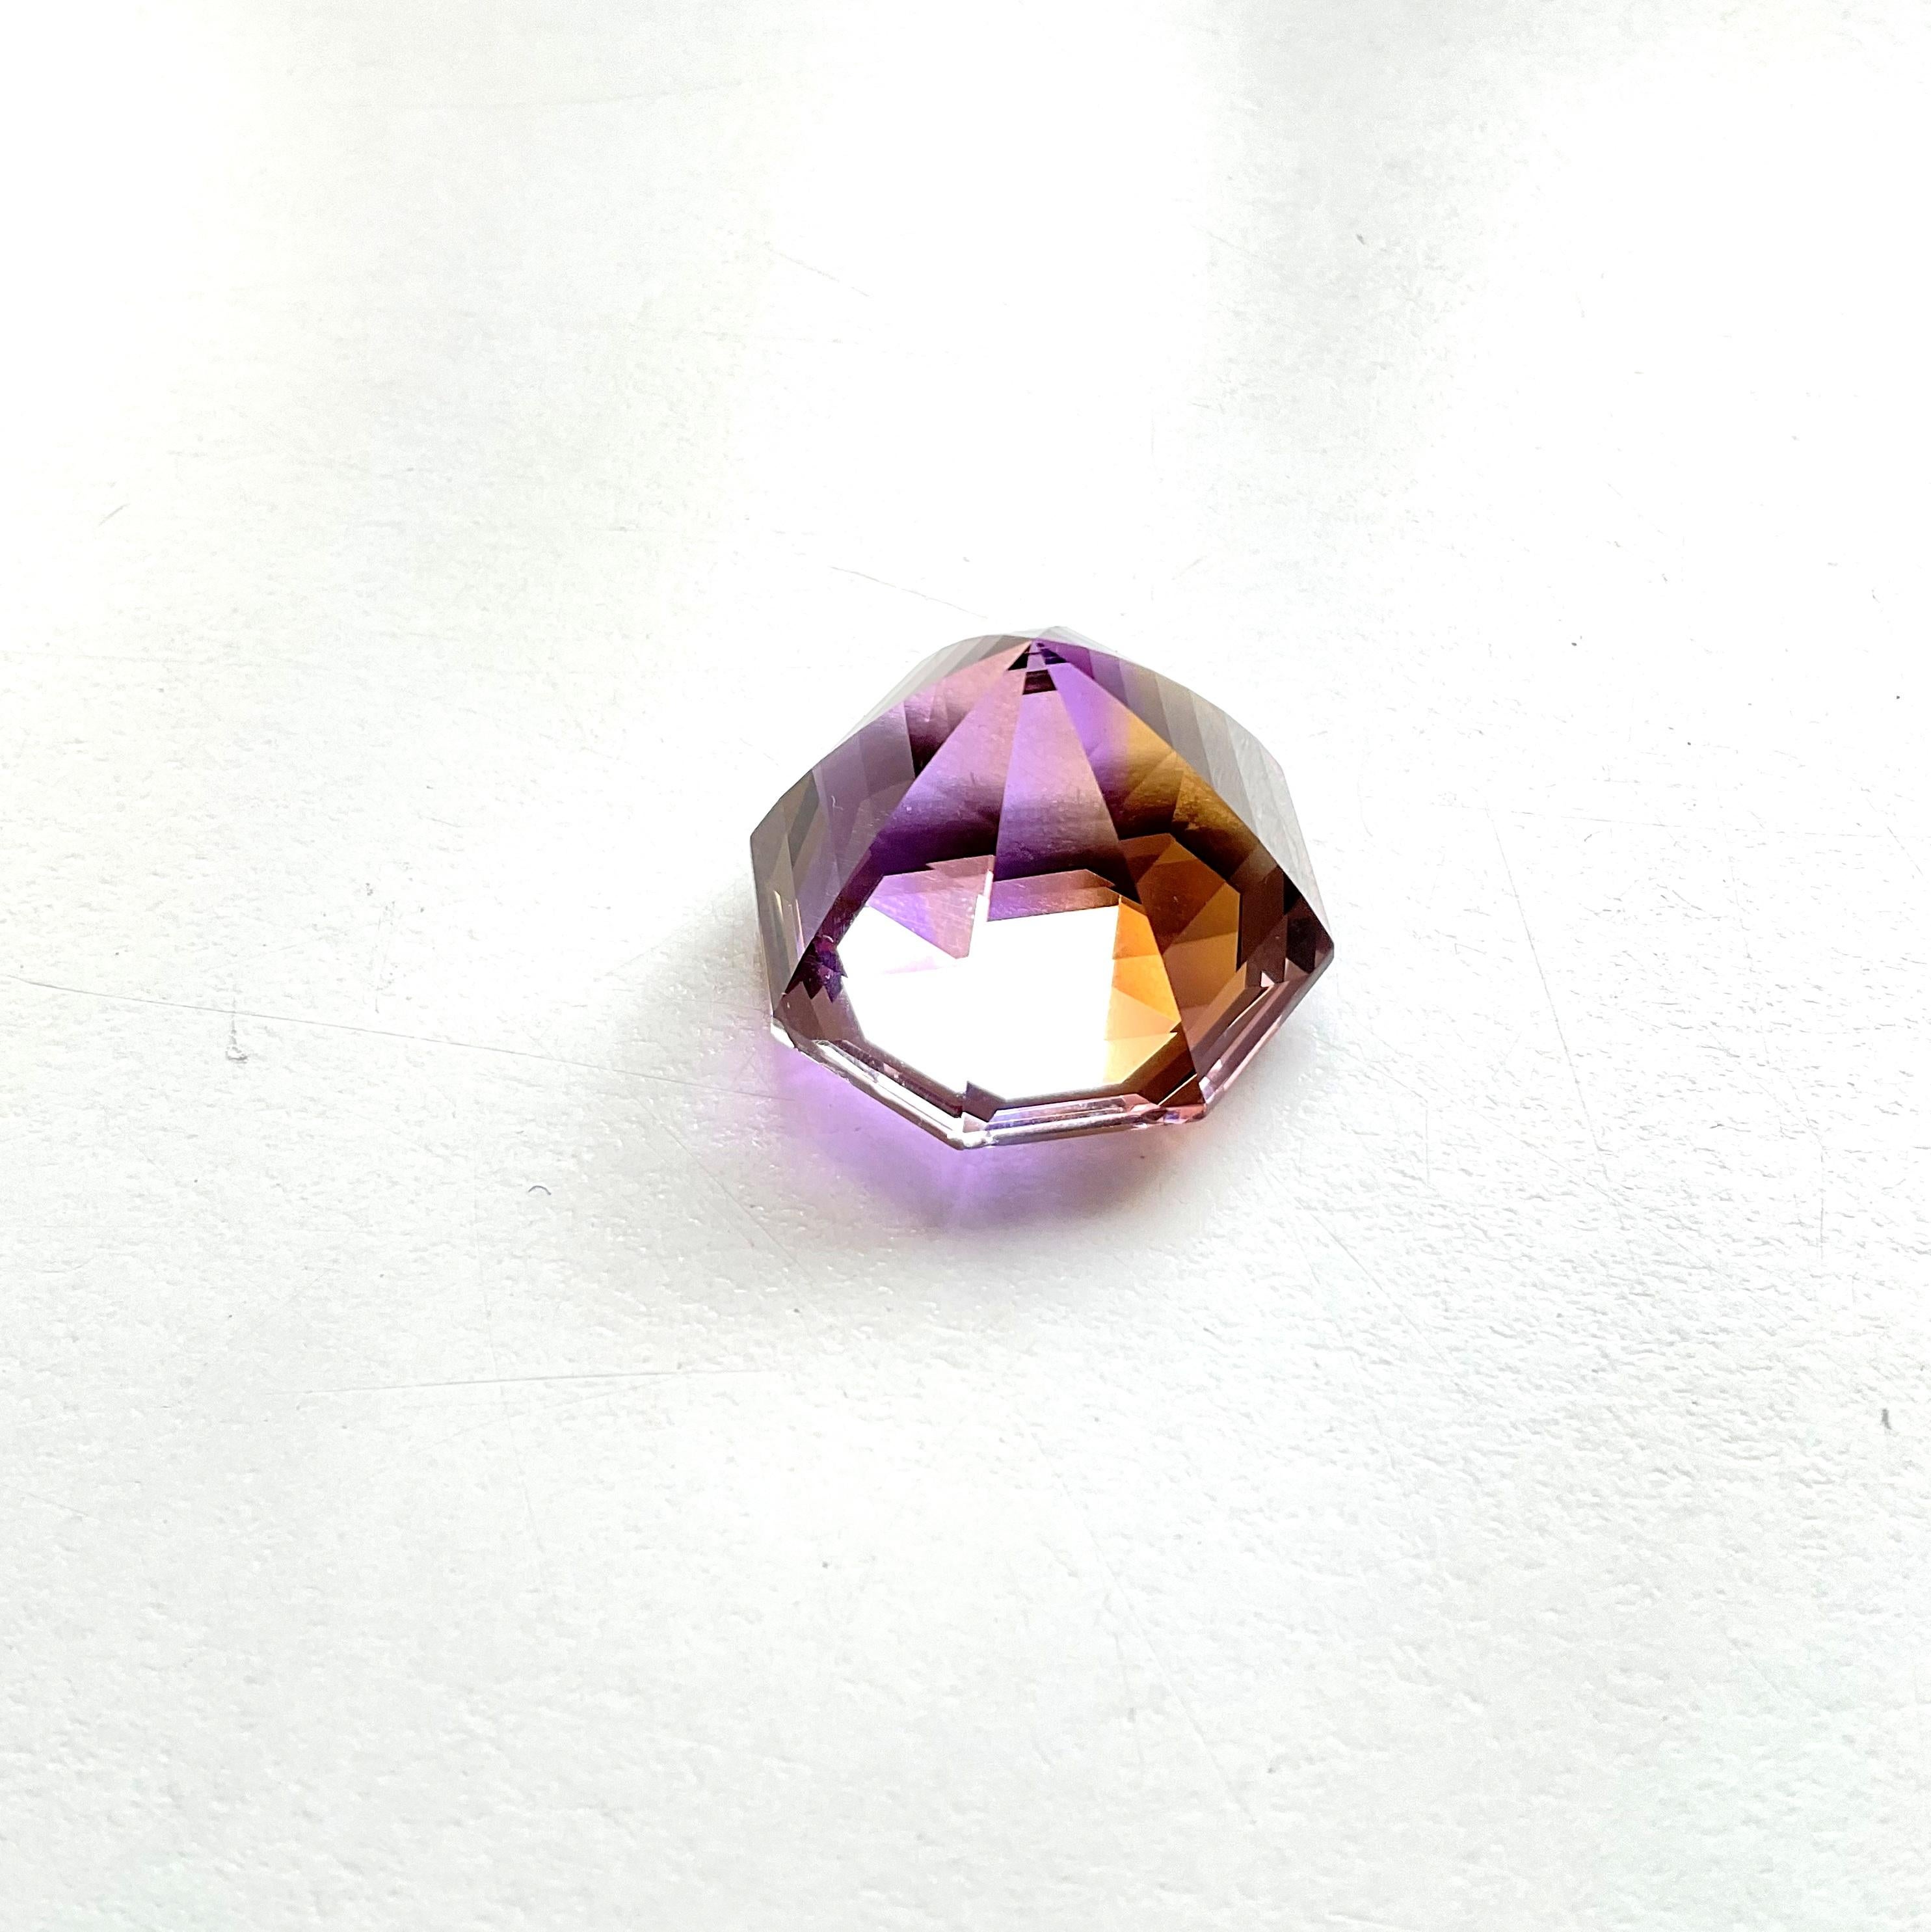 Art Deco Loupe clean 53.67 cts Ametrine Radiant Hexagon Cut Stone For Jewelry Natural Gem For Sale